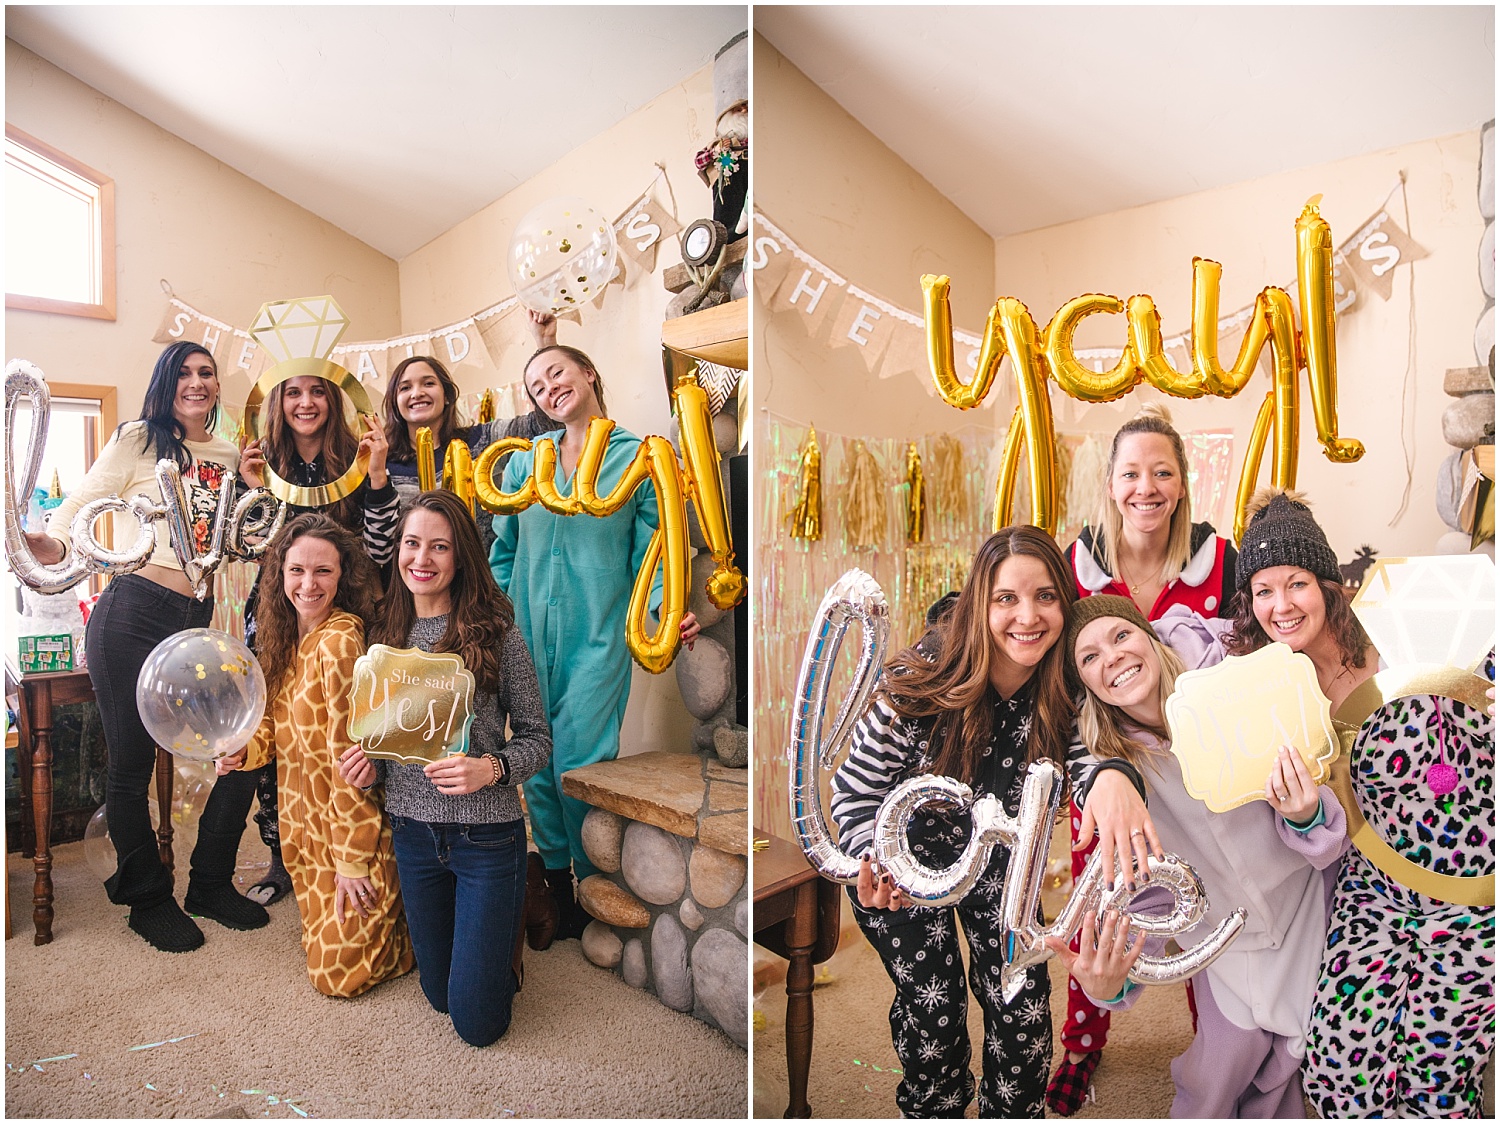 Costume onesie photo booth for surprise proposal engagement party